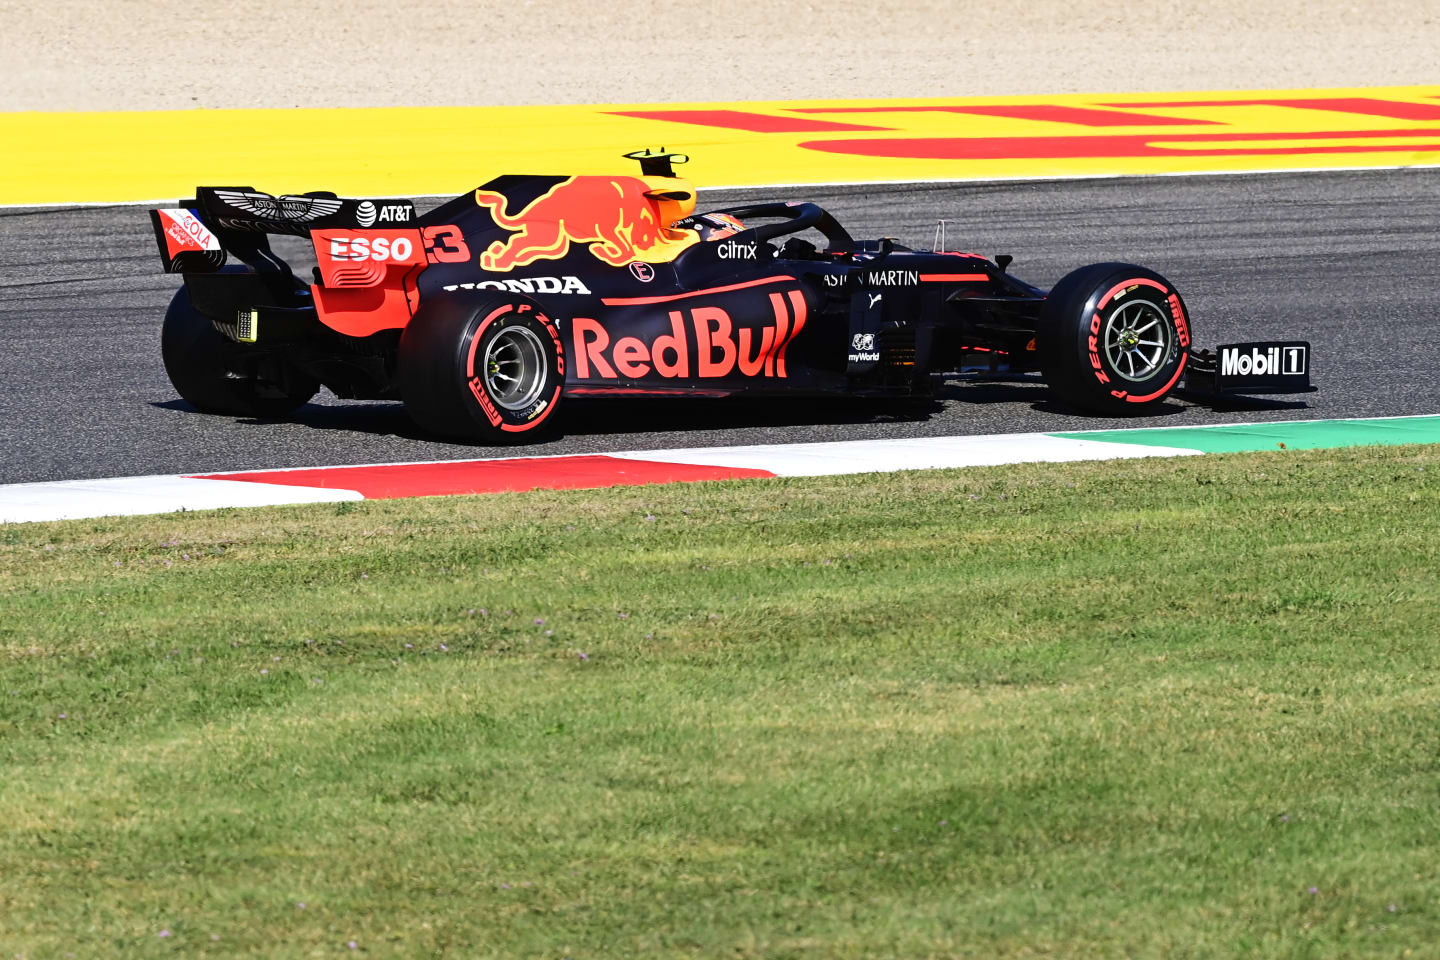 SCARPERIA, ITALY - SEPTEMBER 12: Alexander Albon of Thailand driving the (23) Aston Martin Red Bull Racing RB16 on track during qualifying for the F1 Grand Prix of Tuscany at Mugello Circuit on September 12, 2020 in Scarperia, Italy. (Photo by Miguel Medina - Pool/Getty Images)